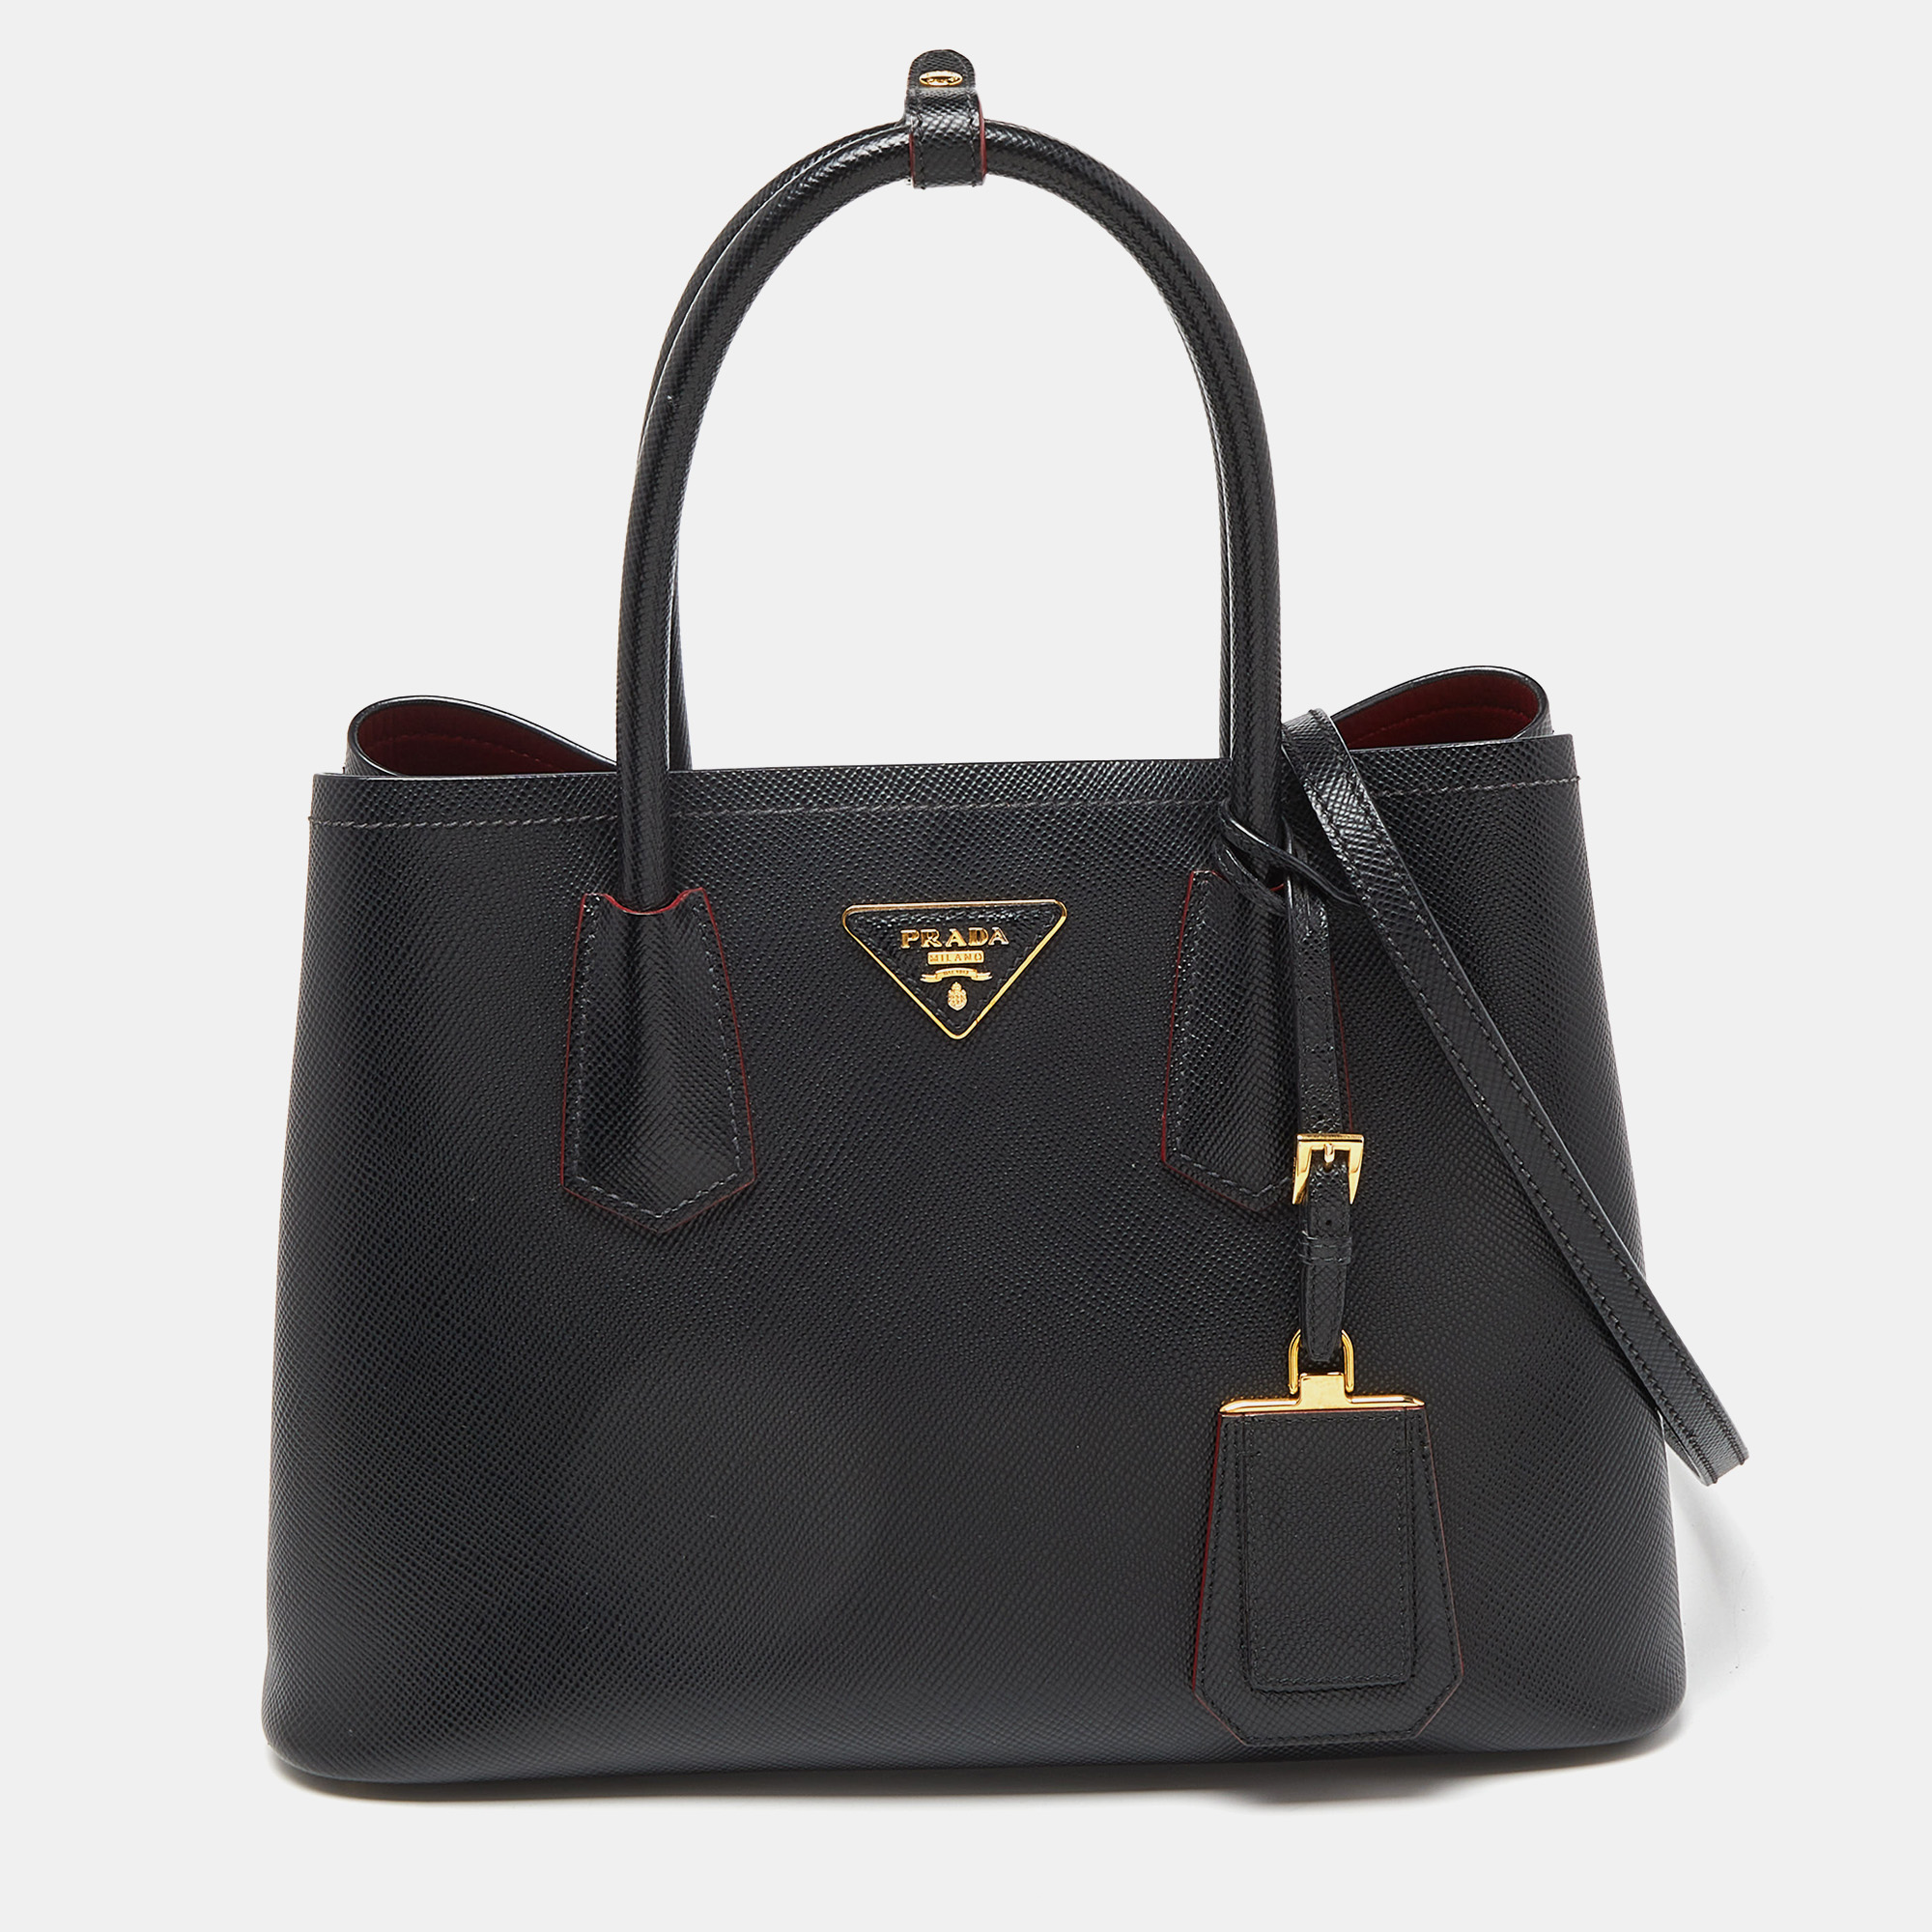 Indulge in luxury with this Prada bag. Meticulously crafted from premium materials it combines exquisite design impeccable craftsmanship and timeless elegance. Elevate your style with this fashion accessory.